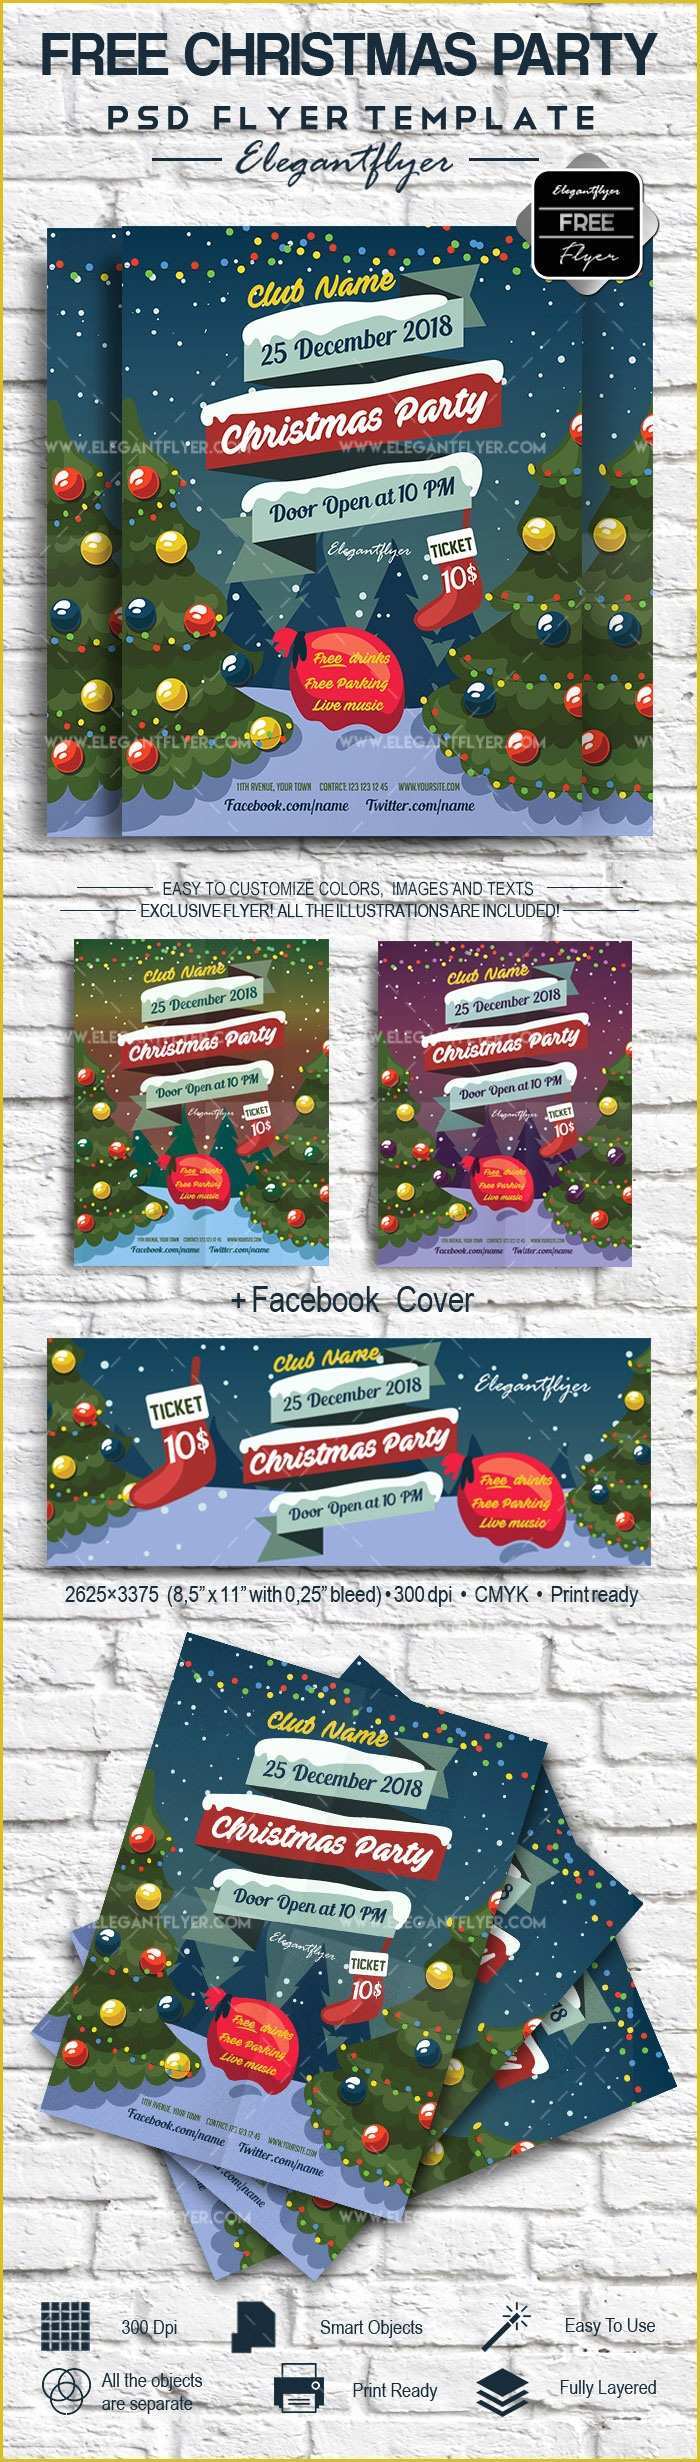 Christmas Party Flyer Template Free Psd Of Psd Flyer for Christmas Tree Party – by Elegantflyer